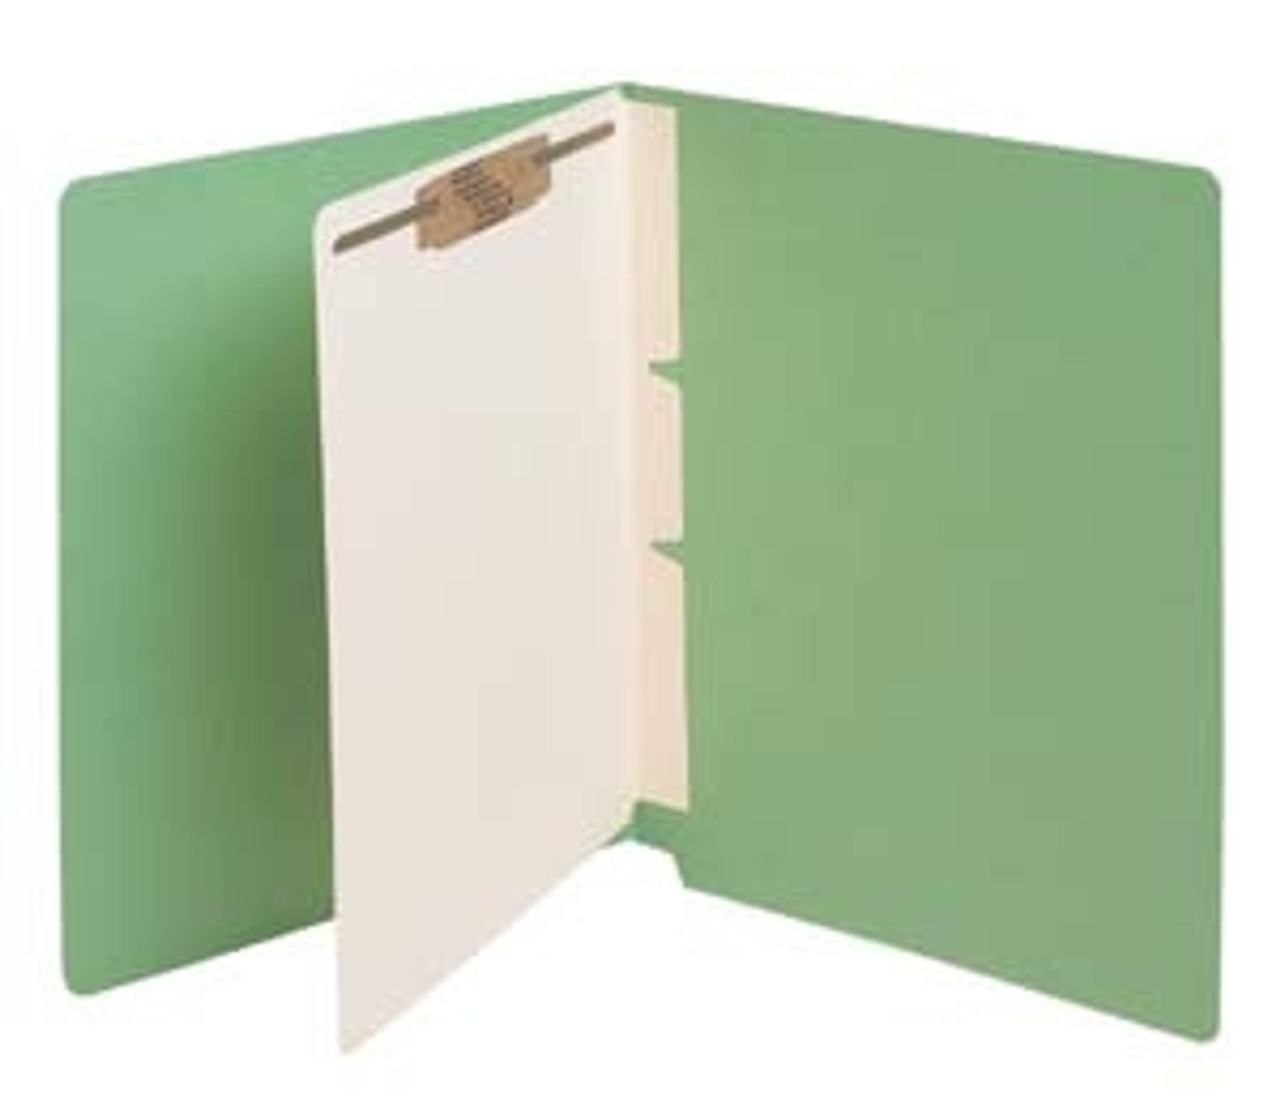 Self-Adhesive Folder Dividers with Twin-Prong Fasteners for Top